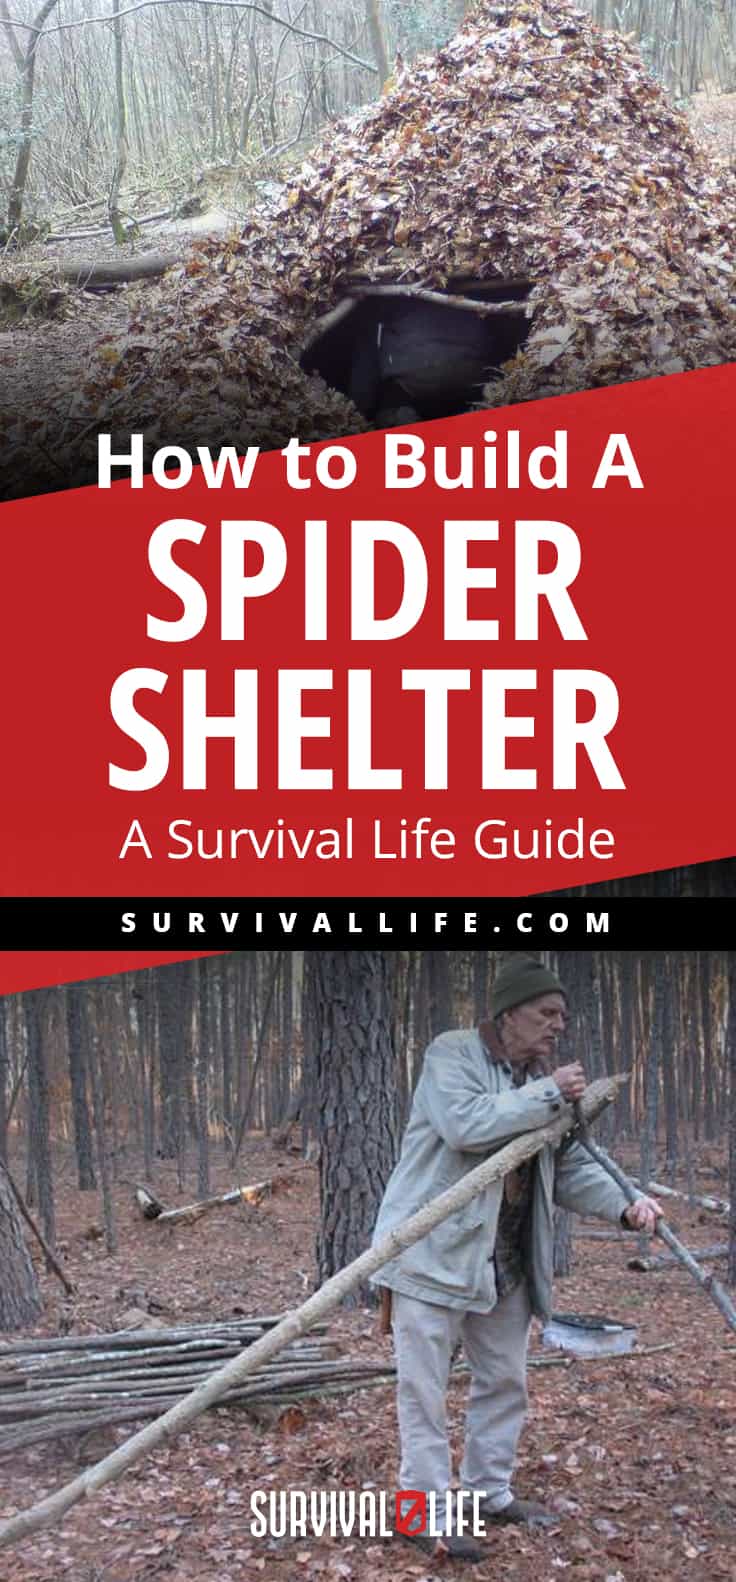 Placard | Building a Survival Shelter | How to Build A Spider Shelter | A Survival Life Guide